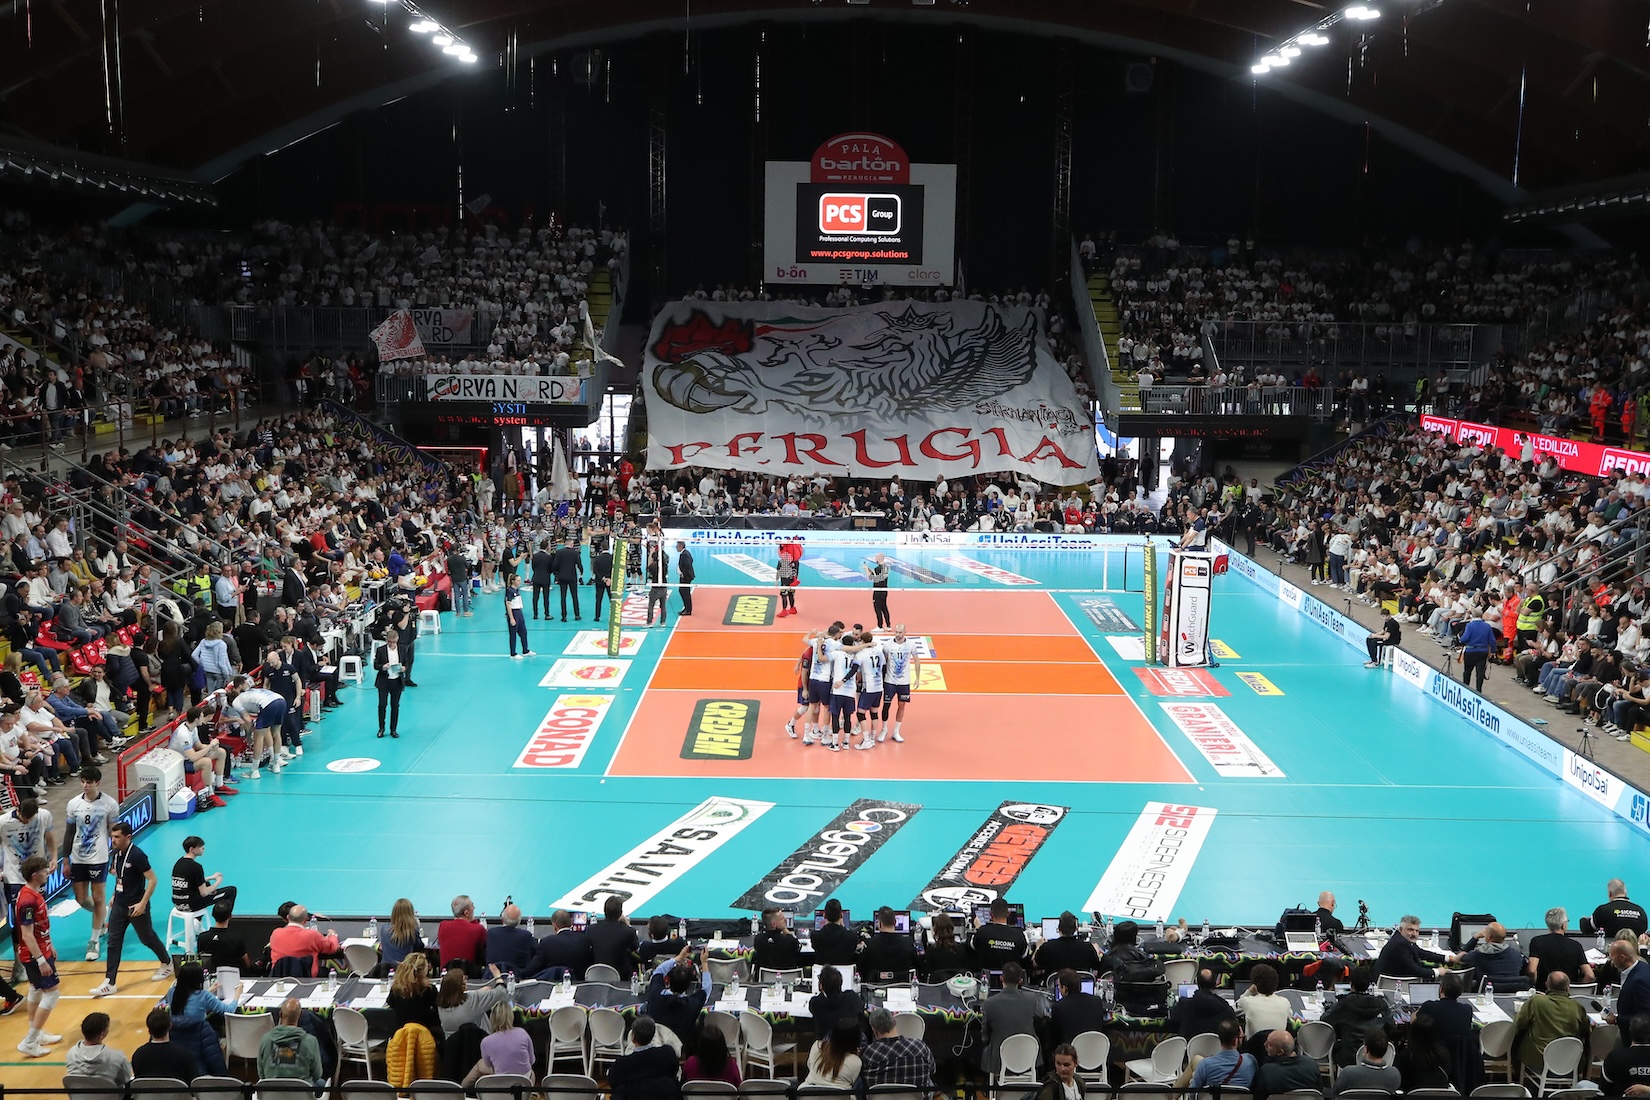 Perugia Edges Closer to Glory with a Thrilling Victory Over Monza in SuperLega Showdown